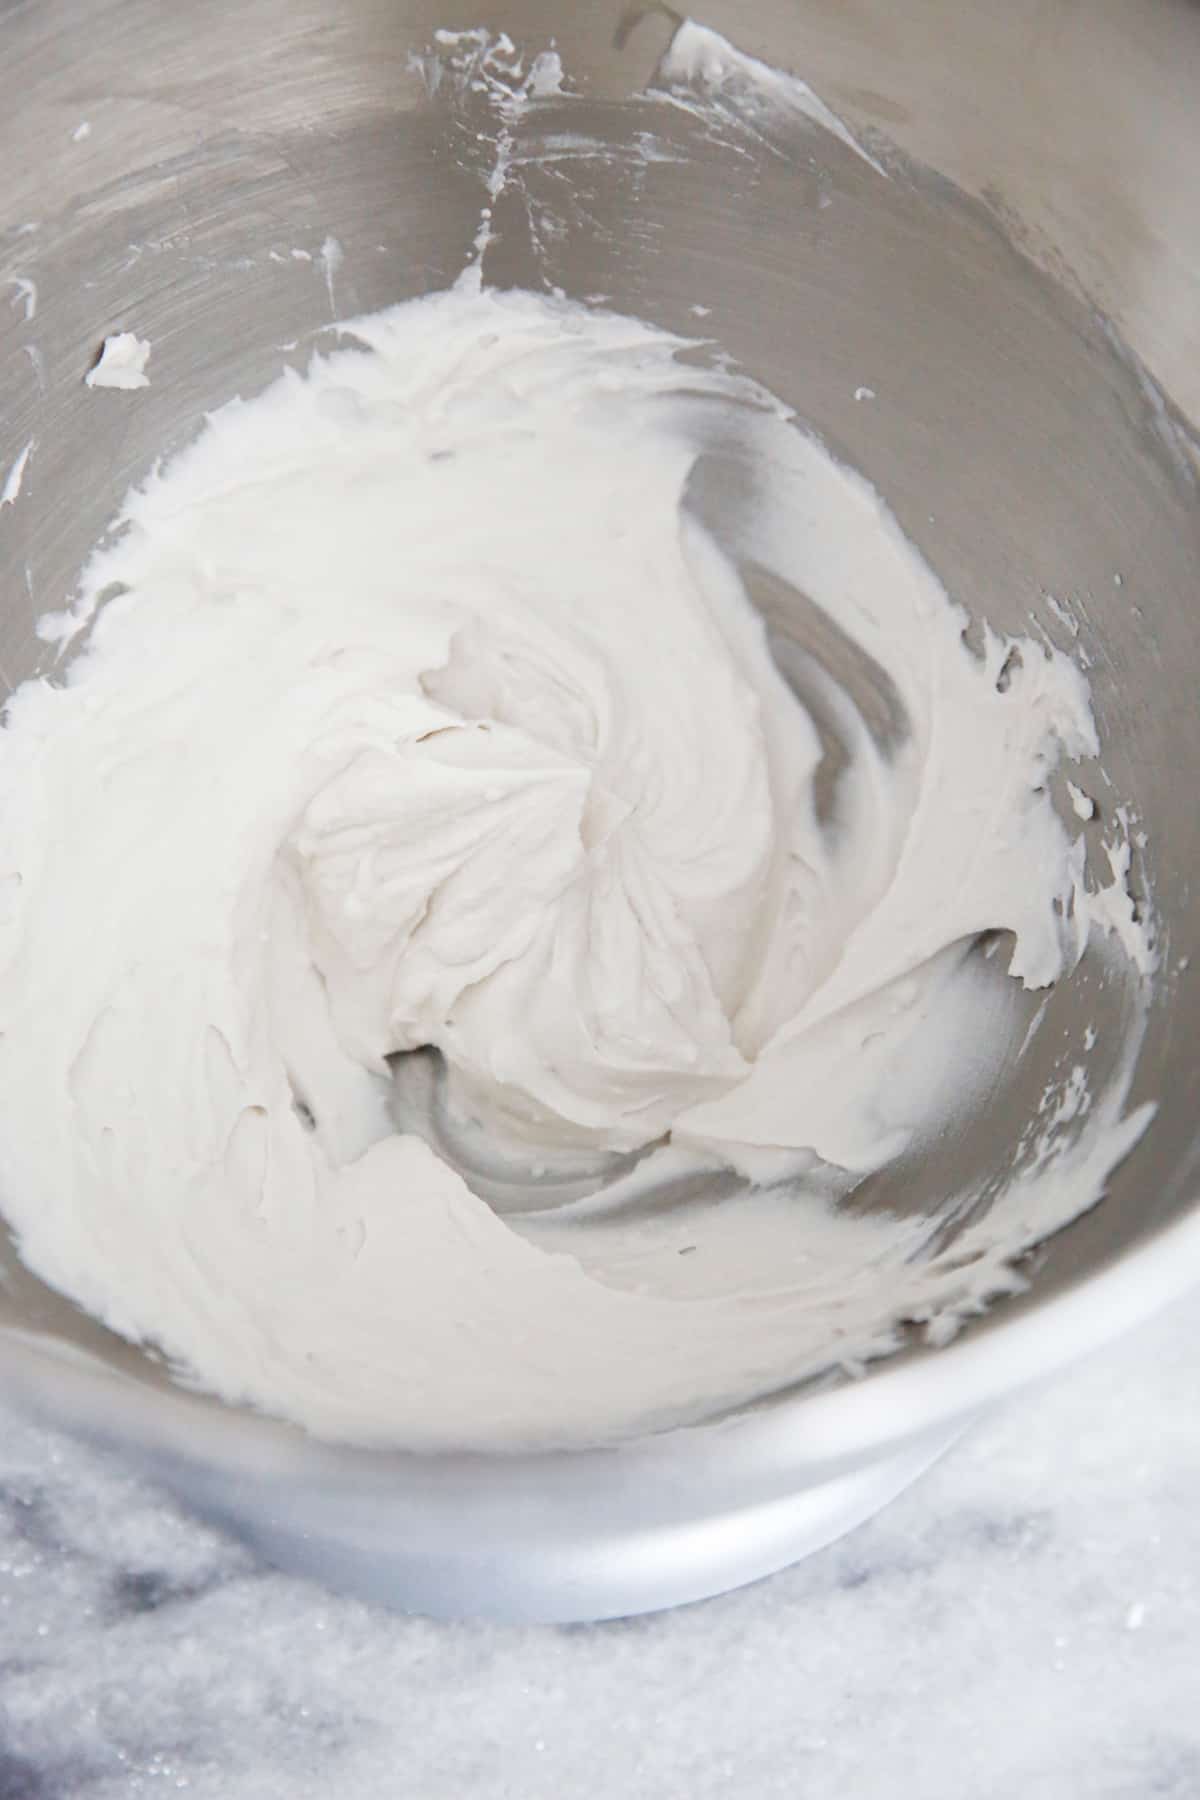 How to Make Coconut Whipped Cream